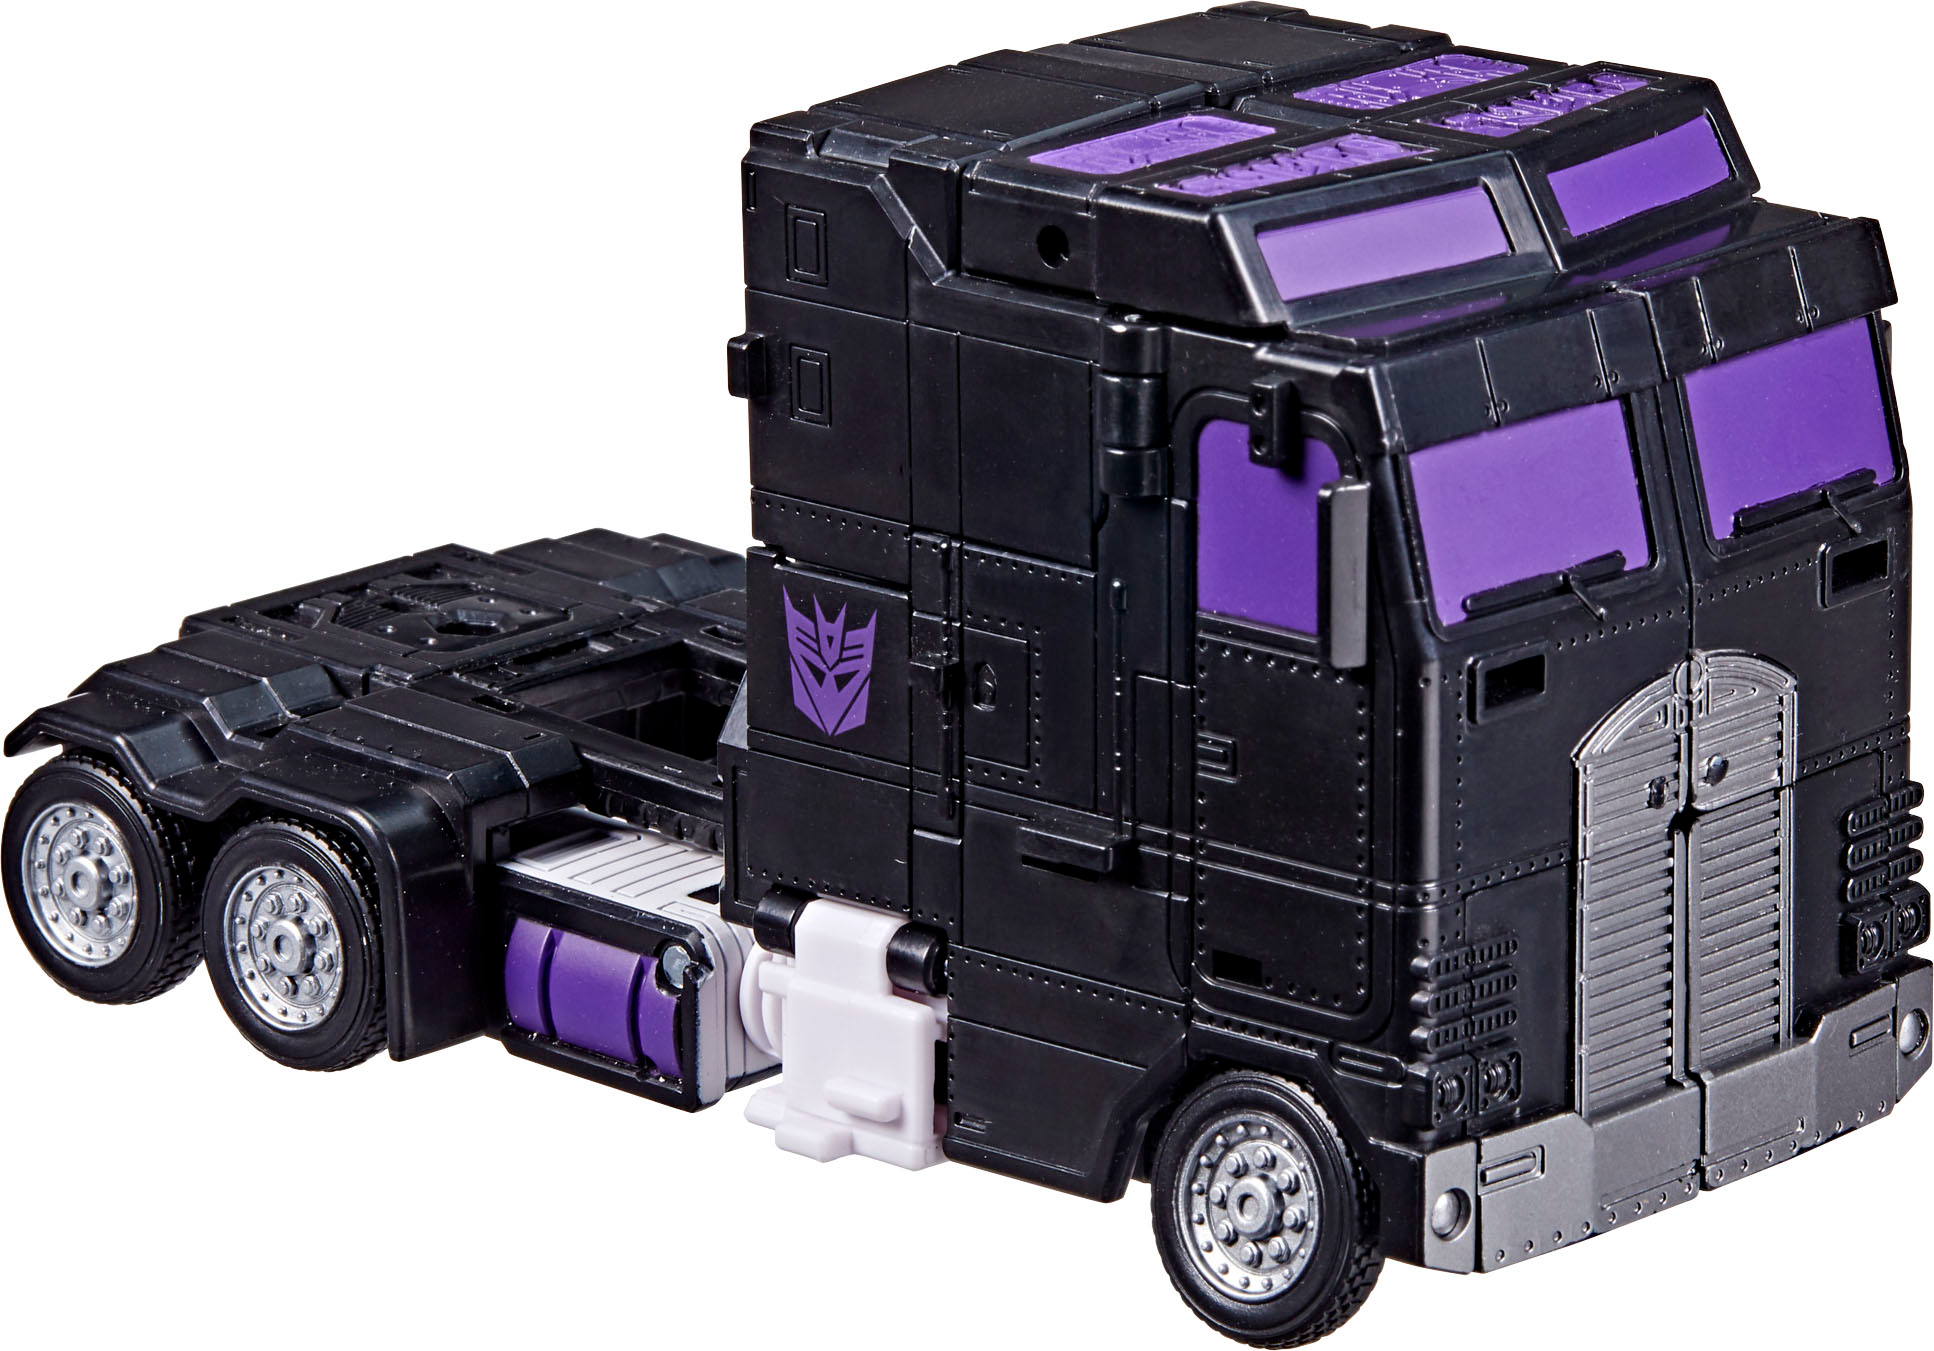 Angle View: Transformers Studio Series 65 Voyager Bumblebee Movie Blitzwing